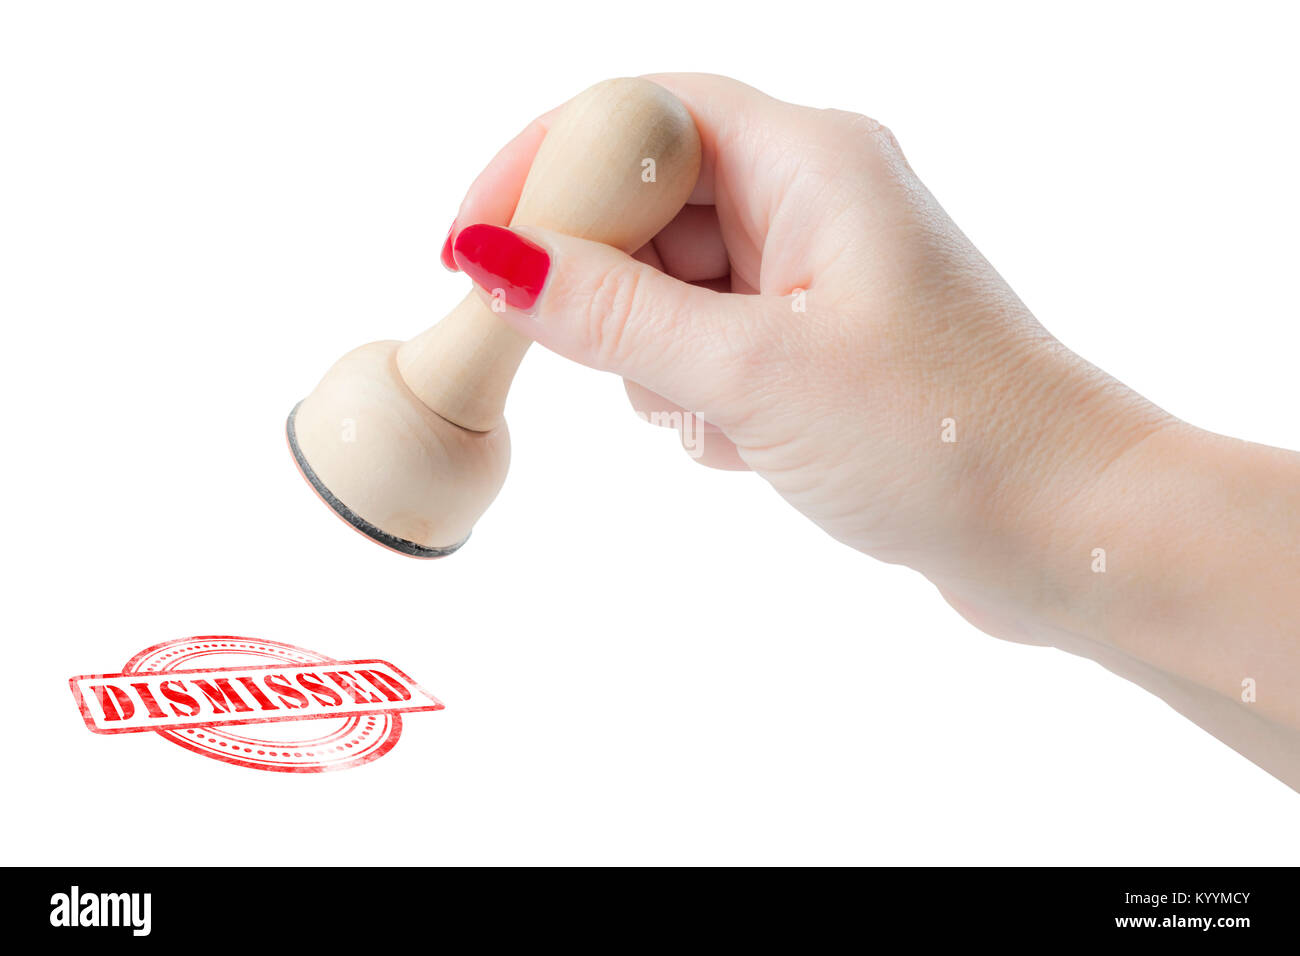 Hand holding a rubber stamp with the word dismissed isolated on a white background Stock Photo